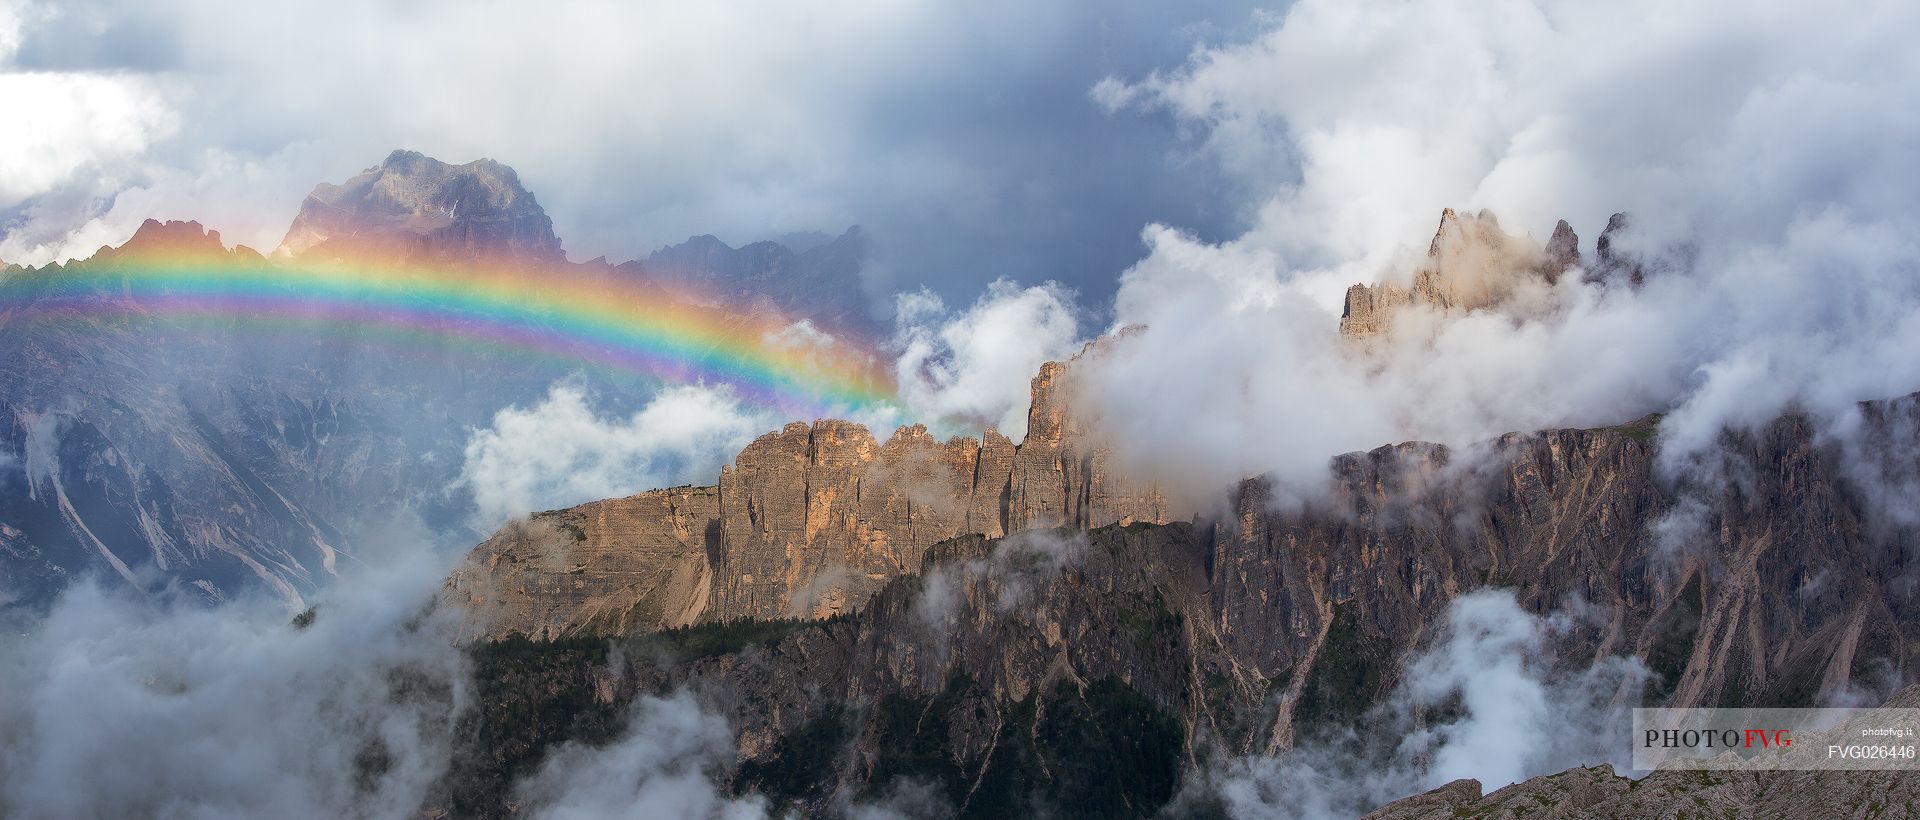 An intense rainbow stands out in front of the Sorapis after a strong thunderstorm with the Croda Da Lago wrapped in the clouds in the foreground, Dolomites, Cortina D'Ampezzo, Italy